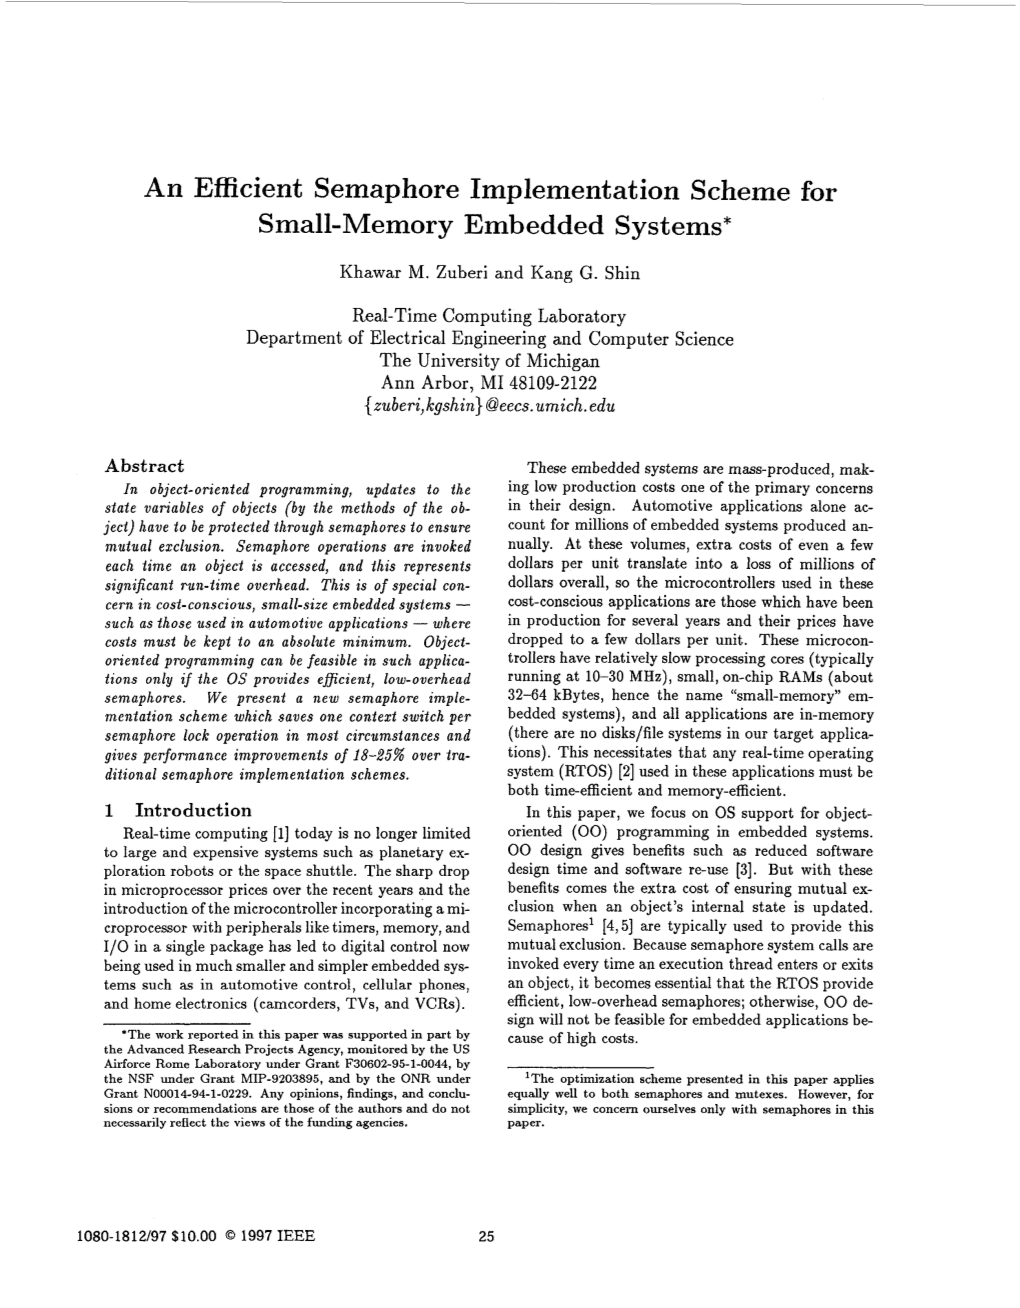 An Efficient Semaphore Implementation Scheme for Small-Memory Embedded Systems*